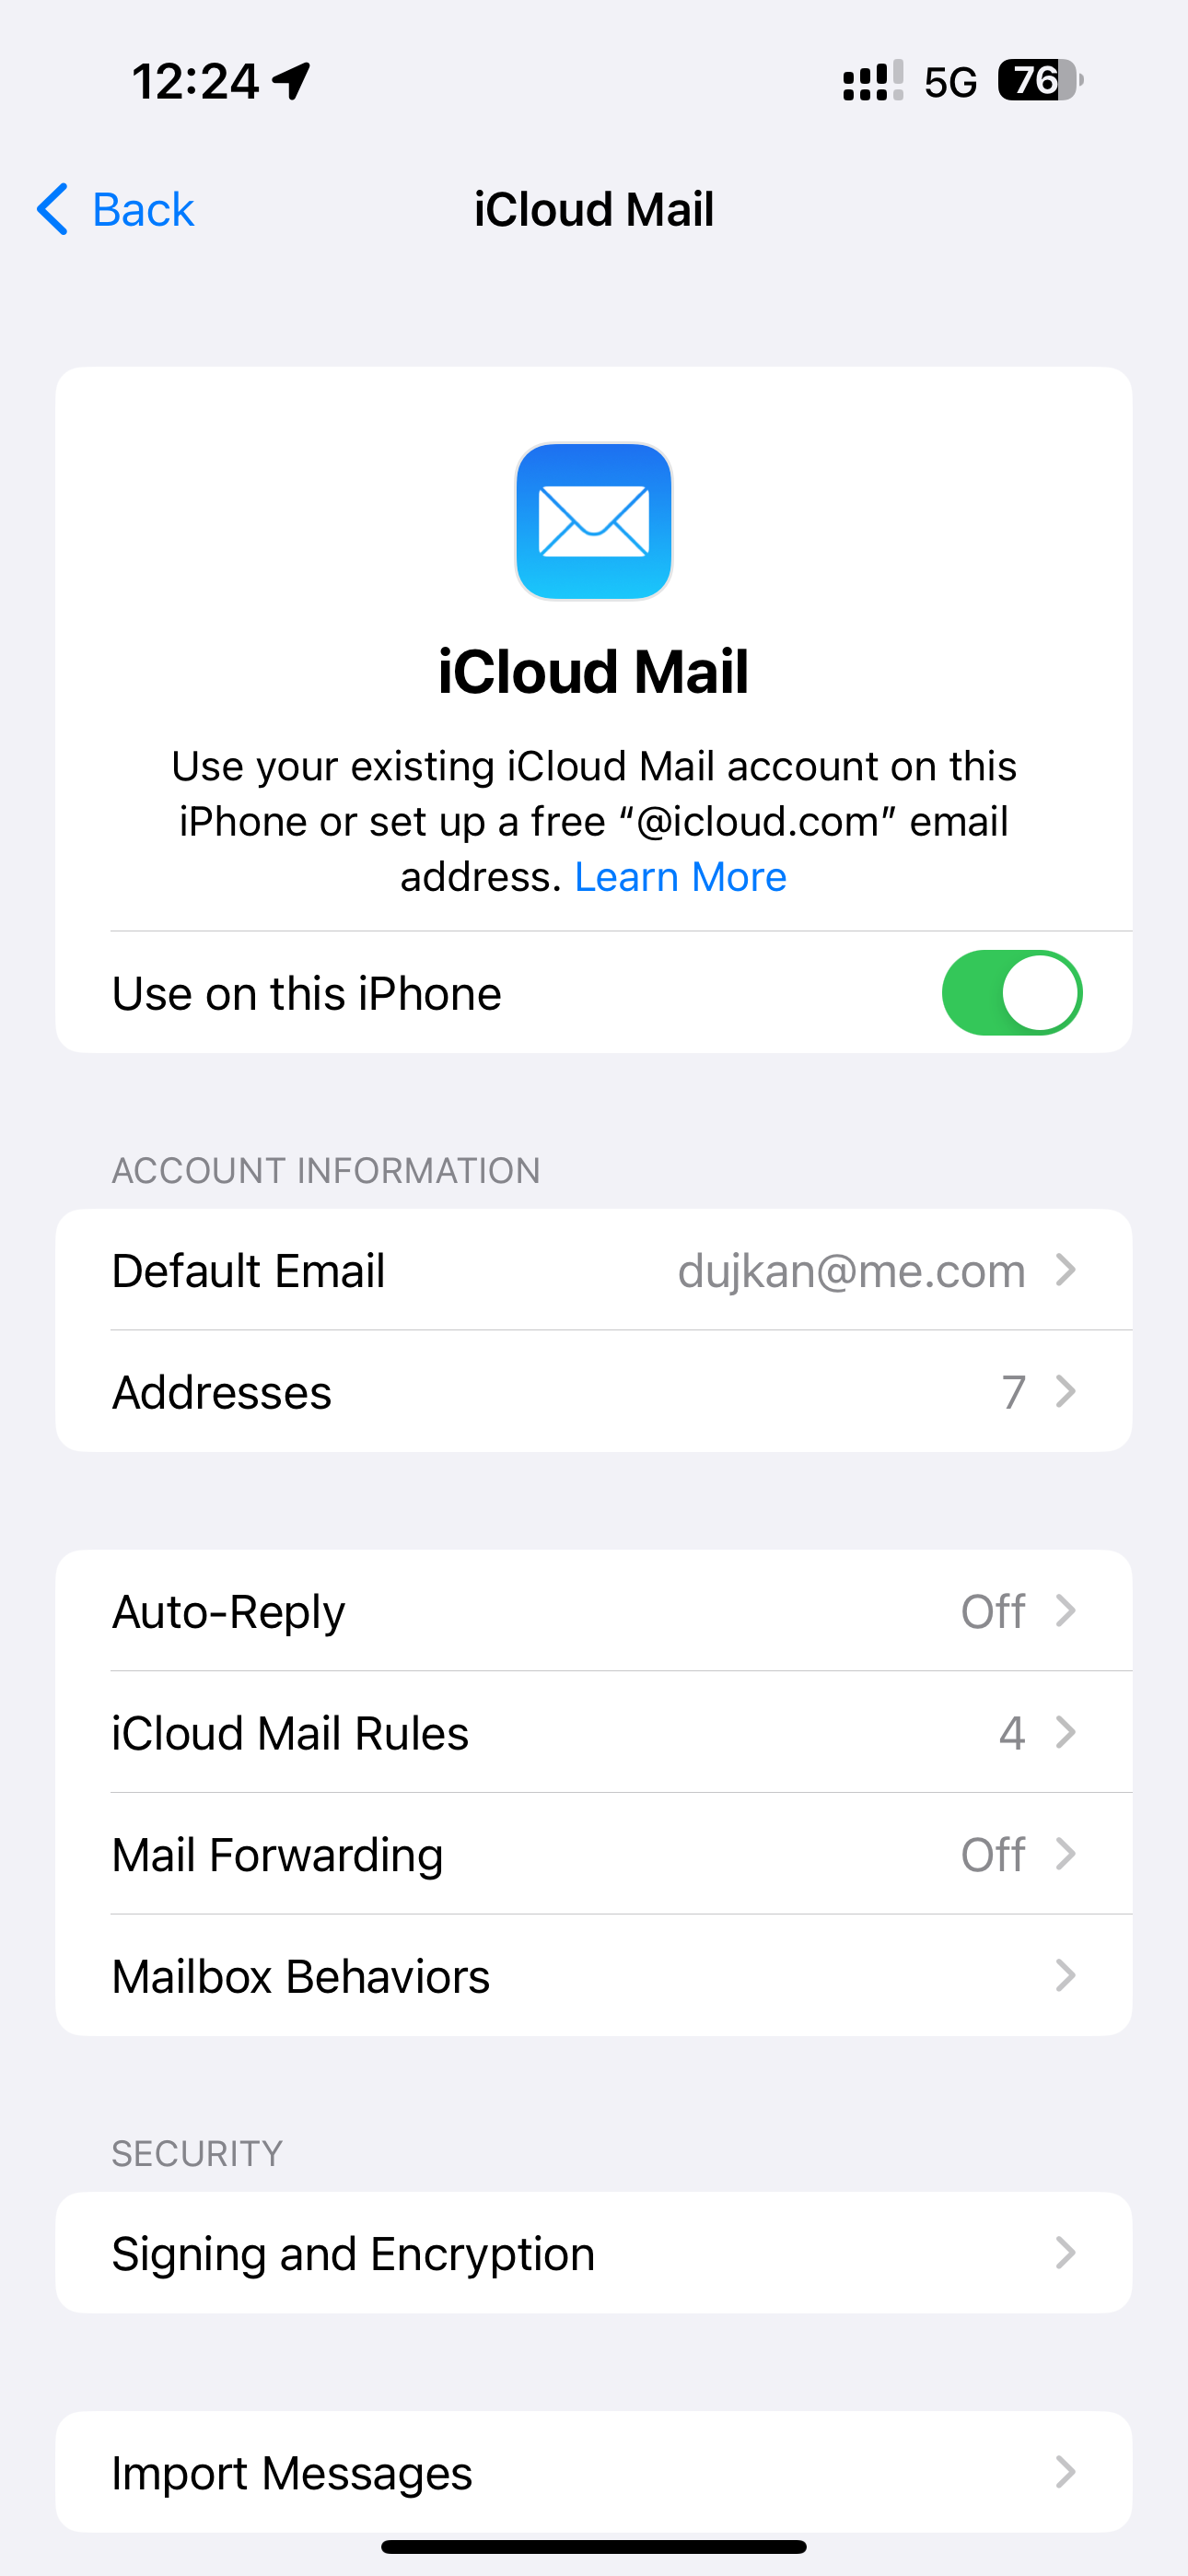 iCloud storage overview for iCloud Mail in the iPhone's Settings app.